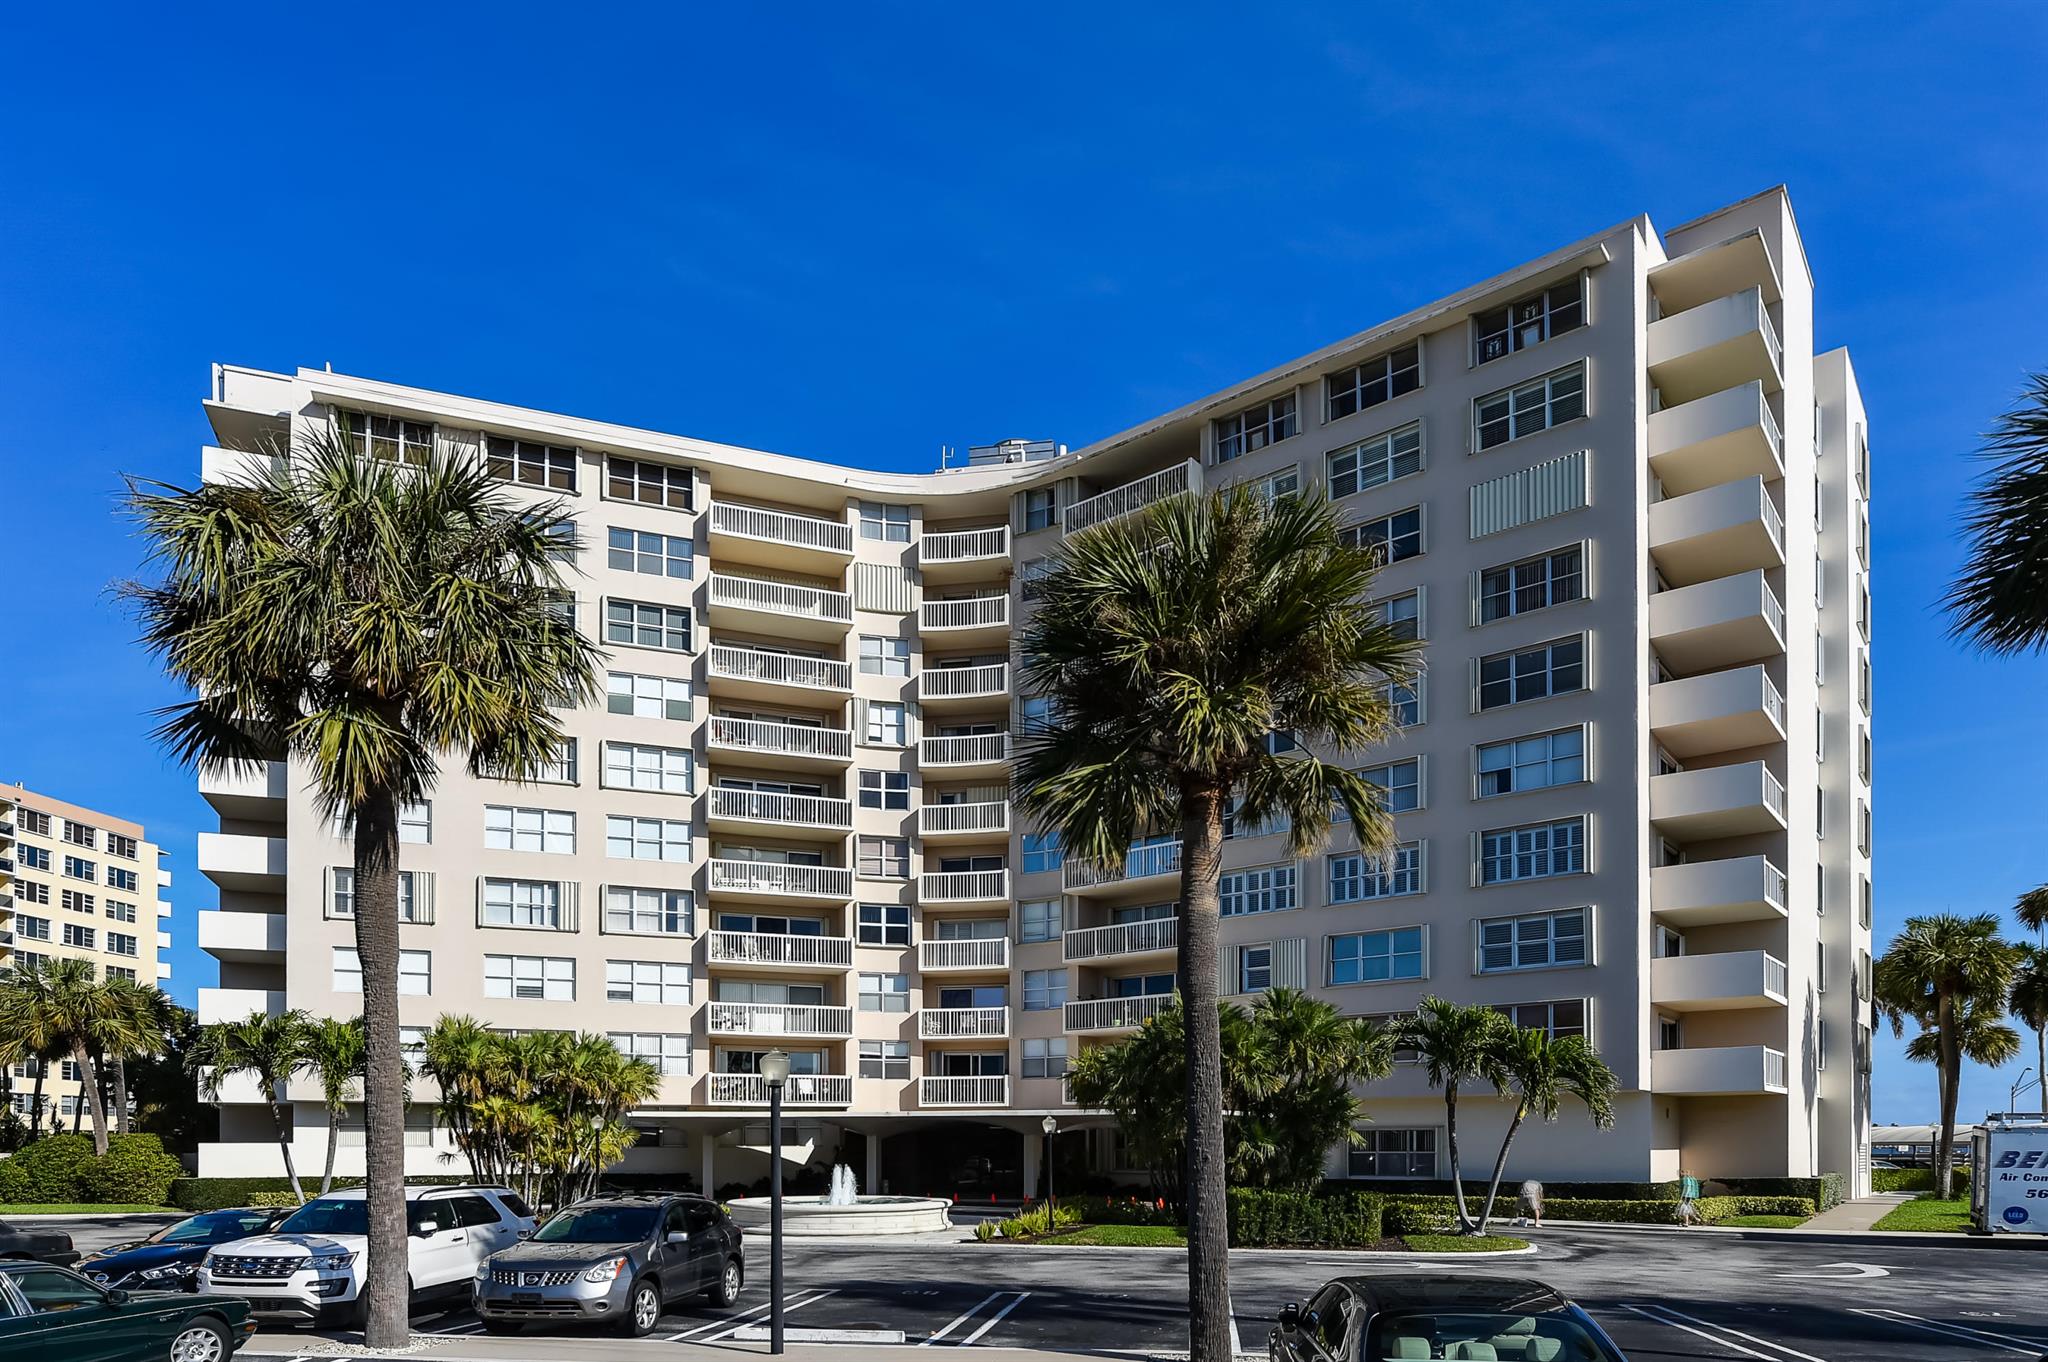 Condo for Rent in West Palm Beach, FL